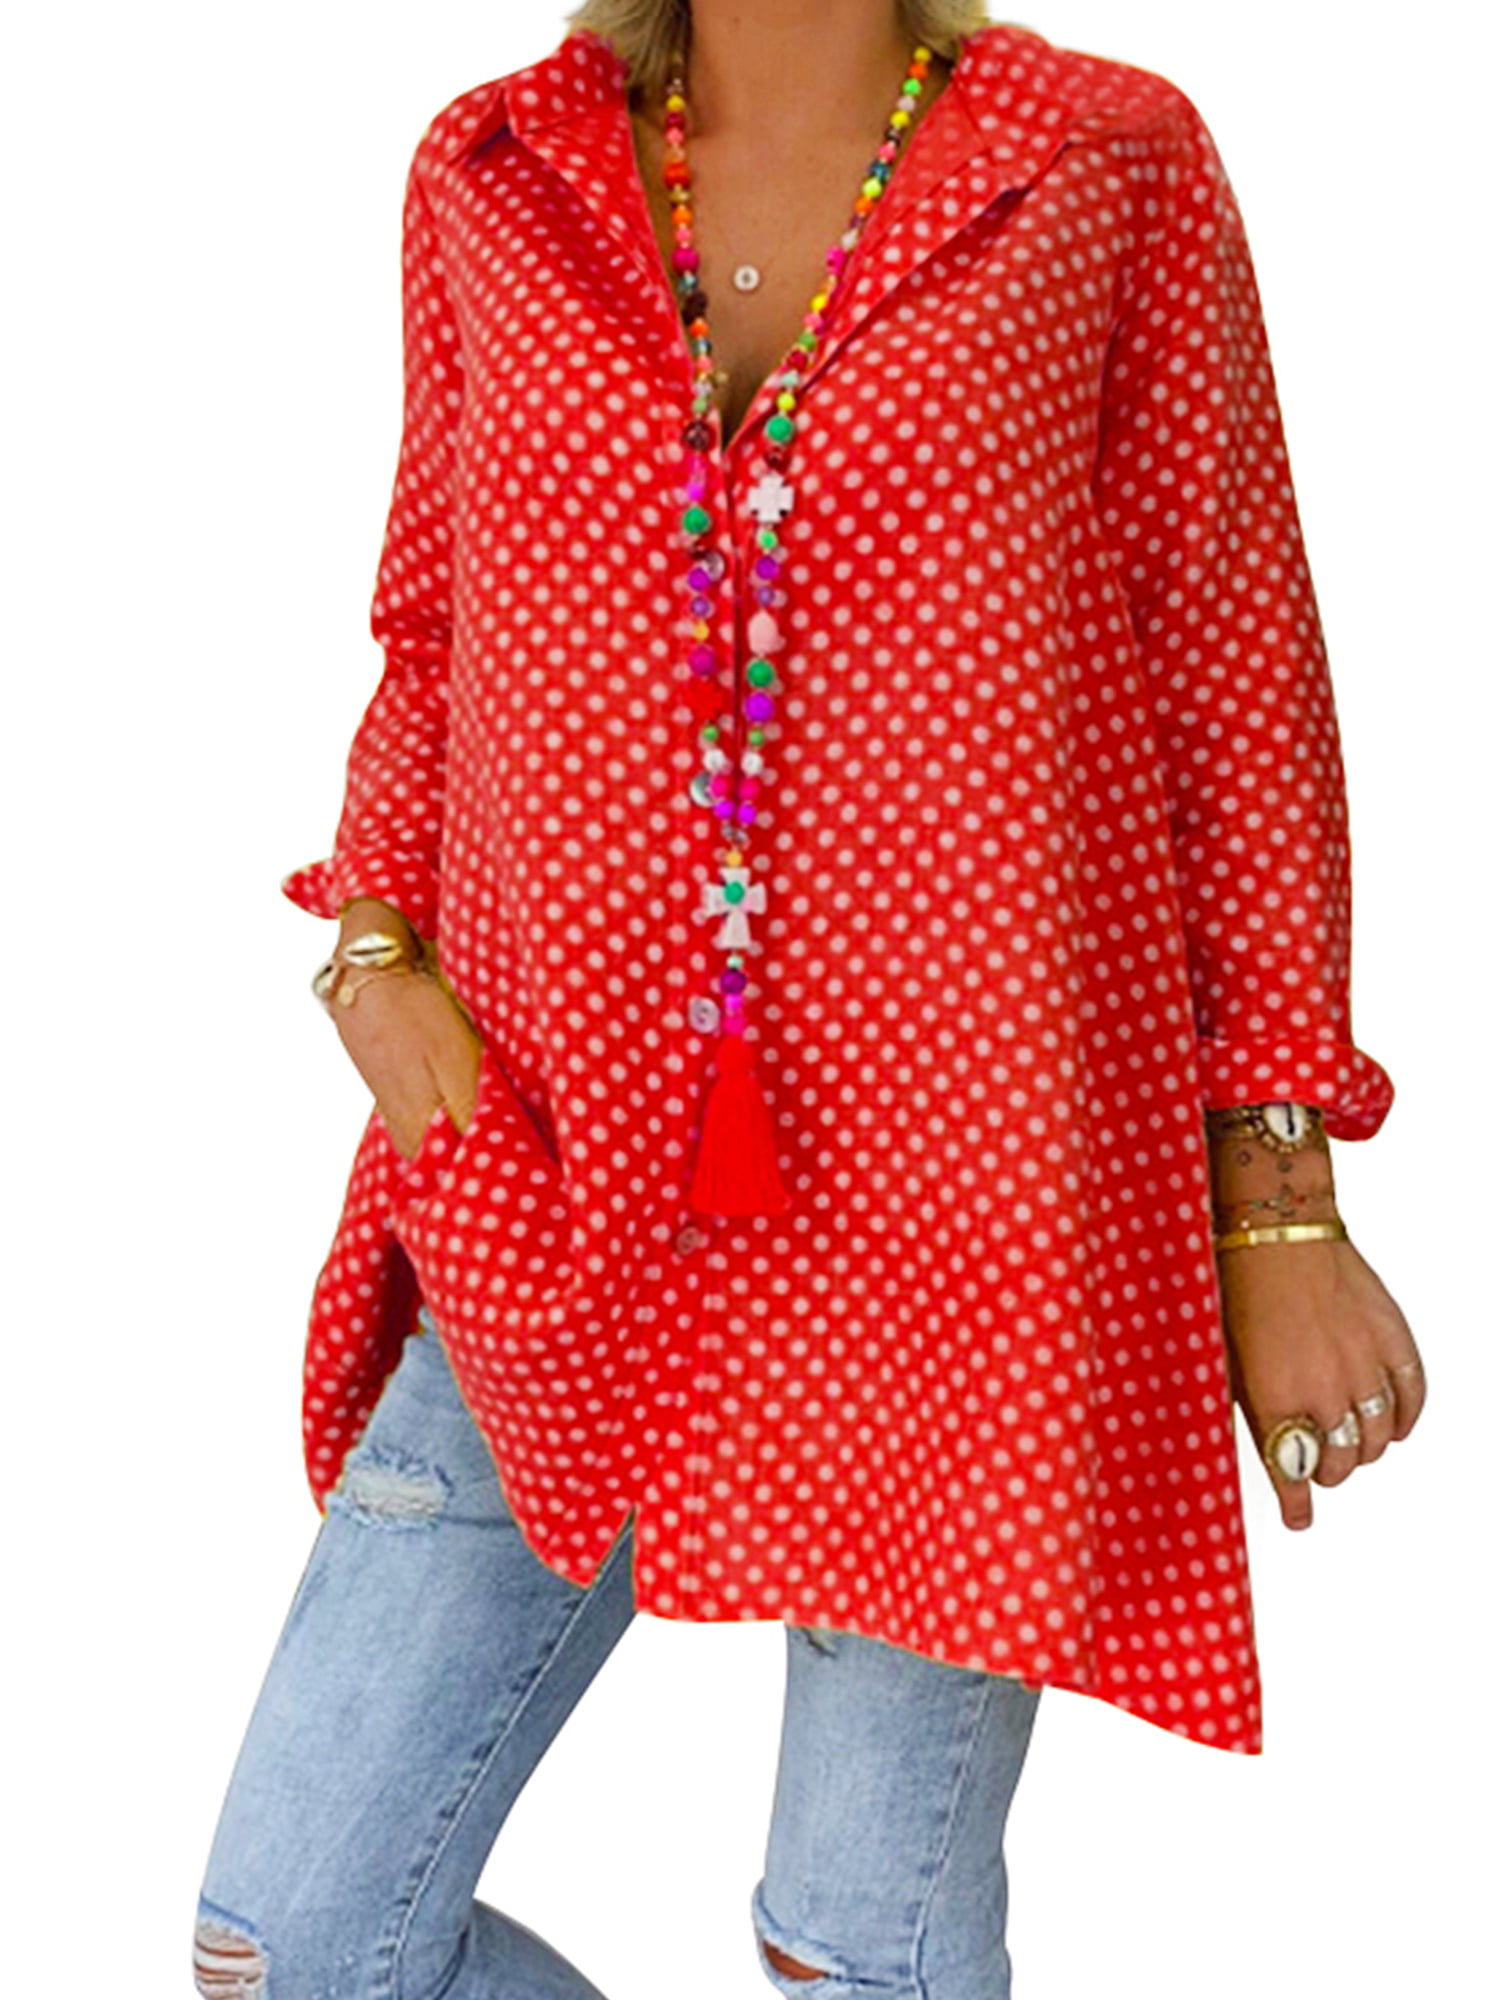 HIMONE - Plus Size Tunic Blouse for Women Roll Up Sleeve Casual Polka ...